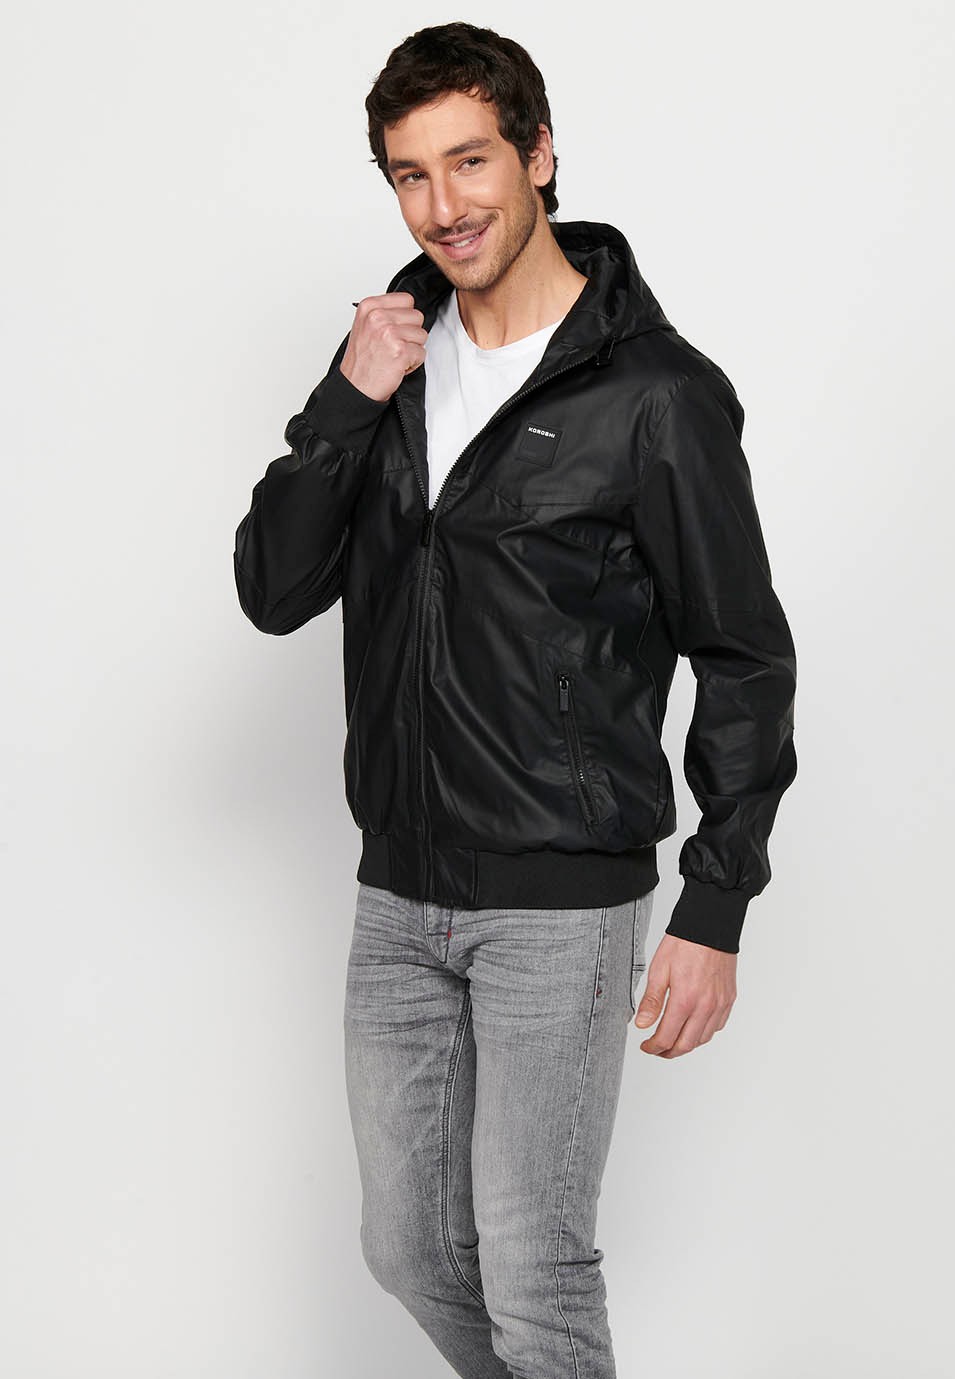 Leather-effect jacket with front zipper closure and hooded collar in black for Men 1